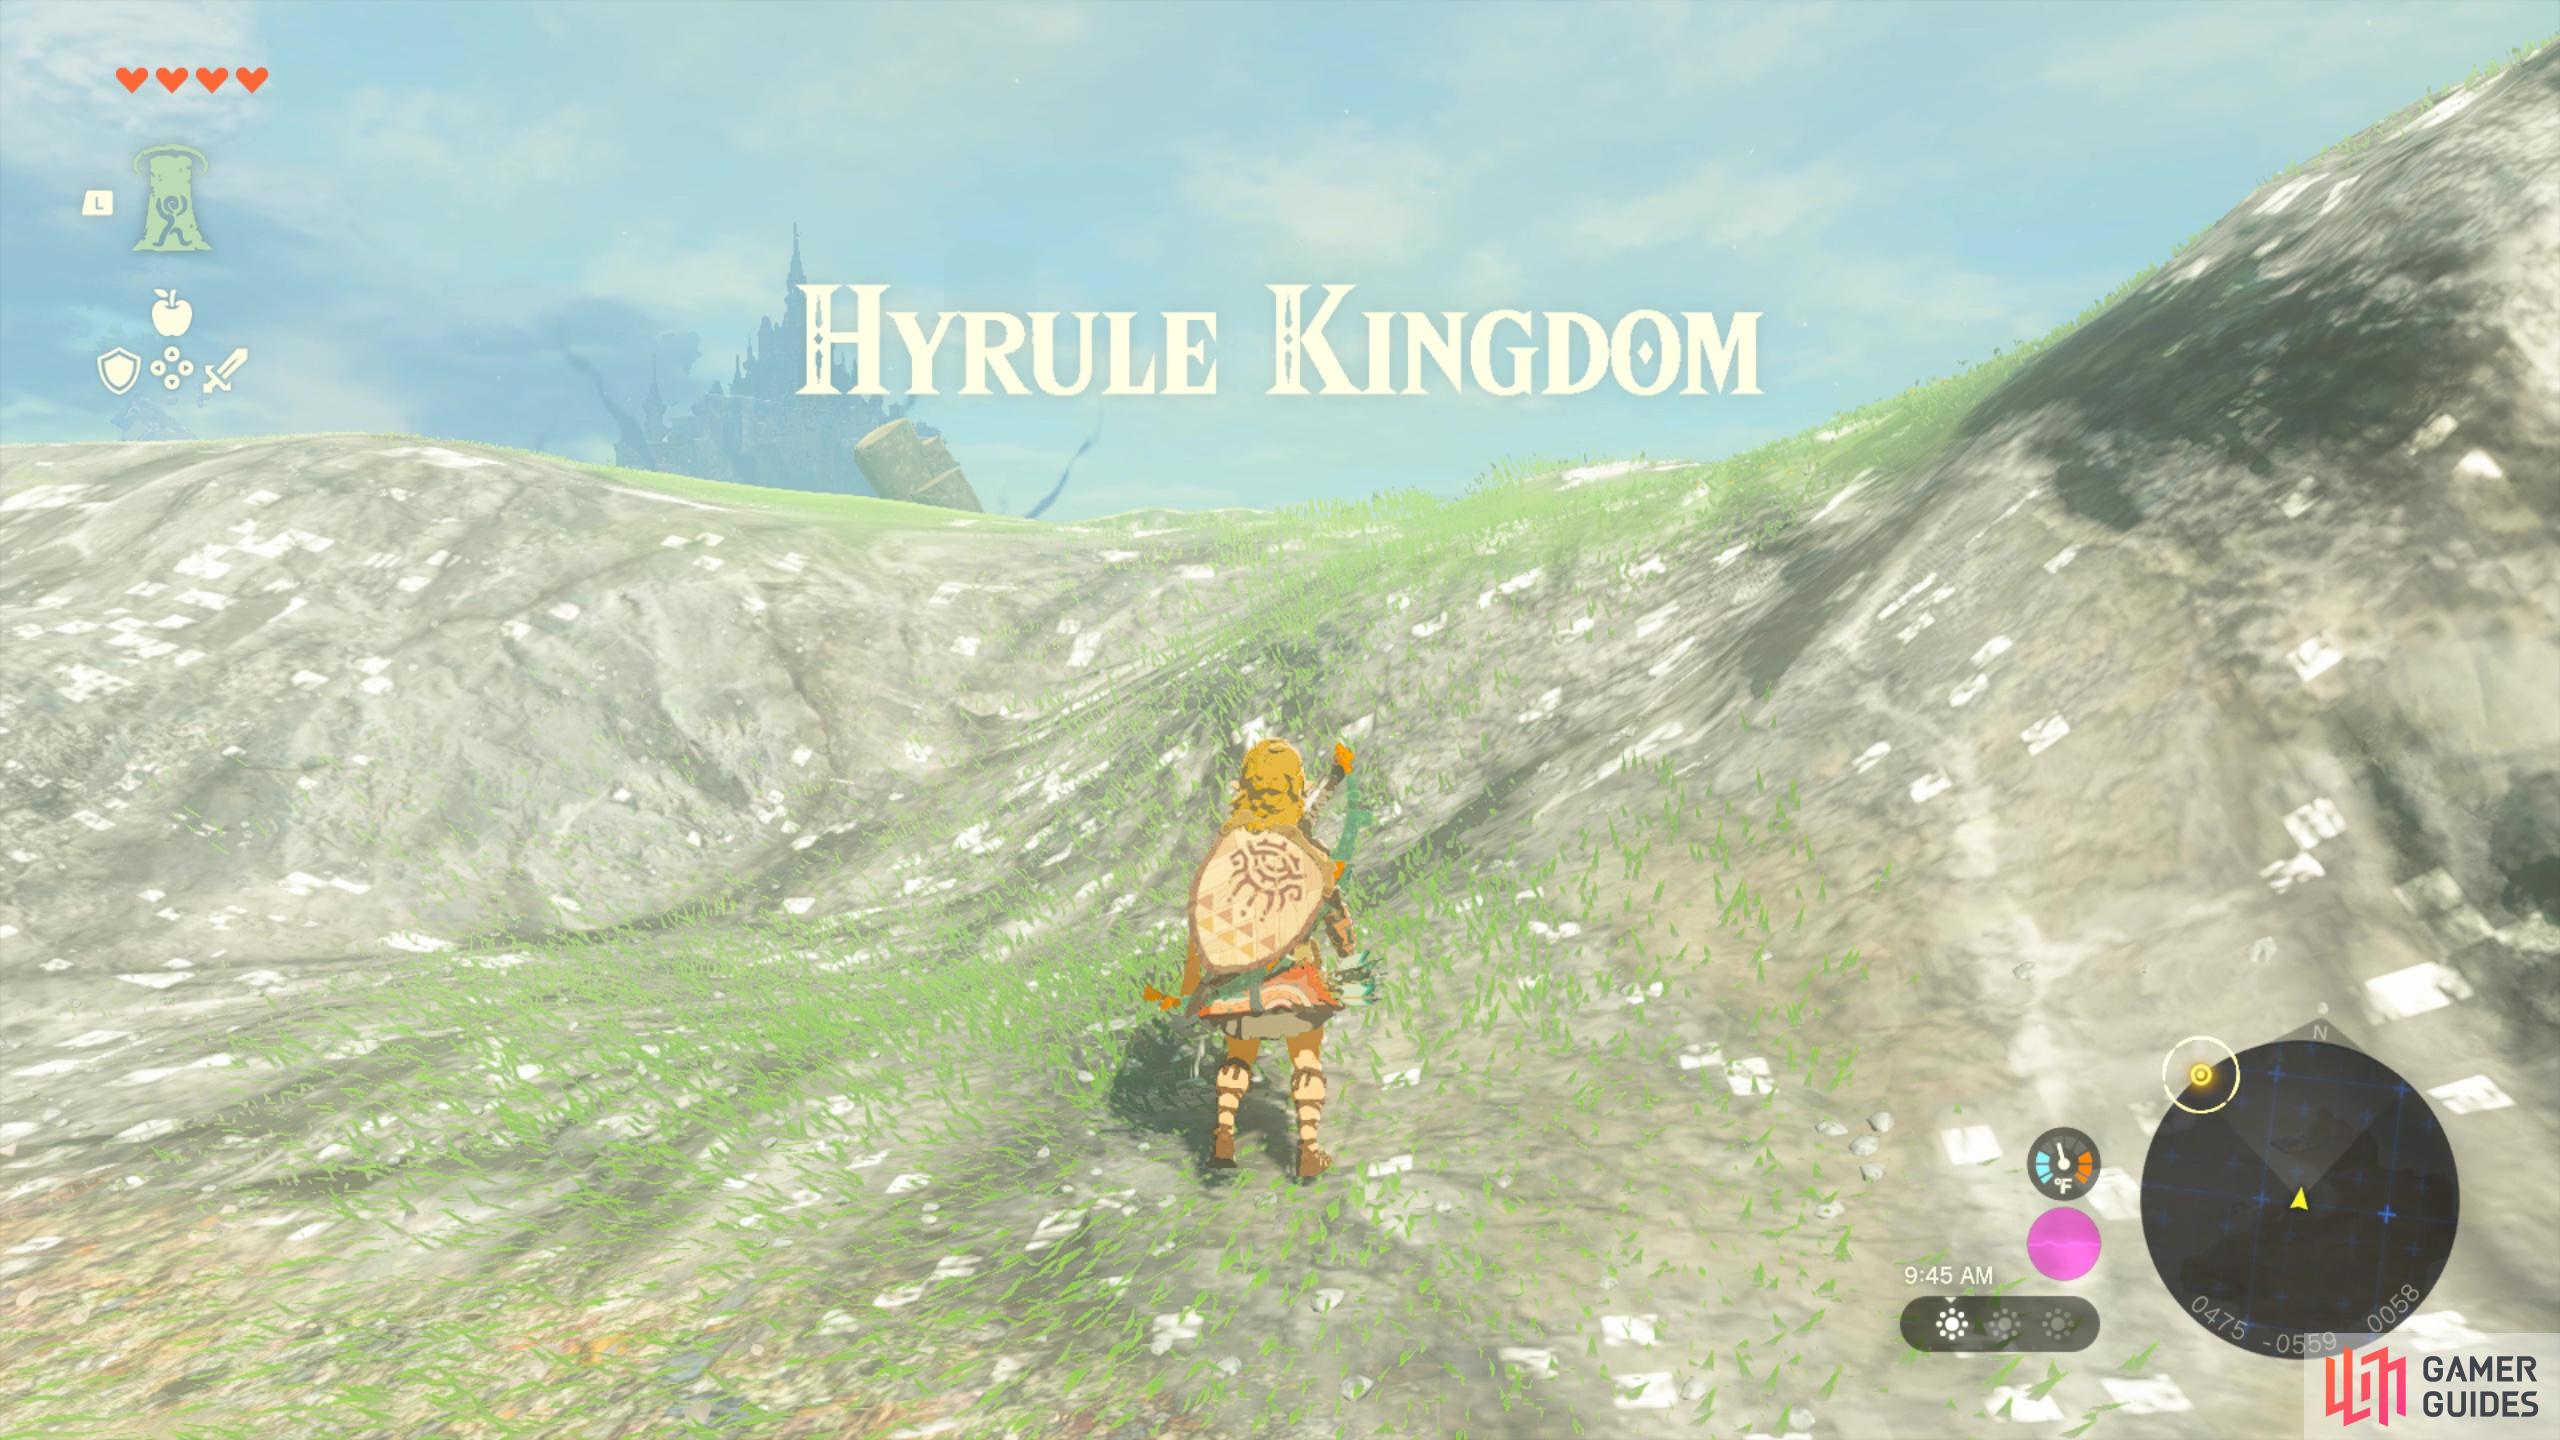 How to Reach Hyrule Kingdom. Read on below to find how to get to this fabled place.